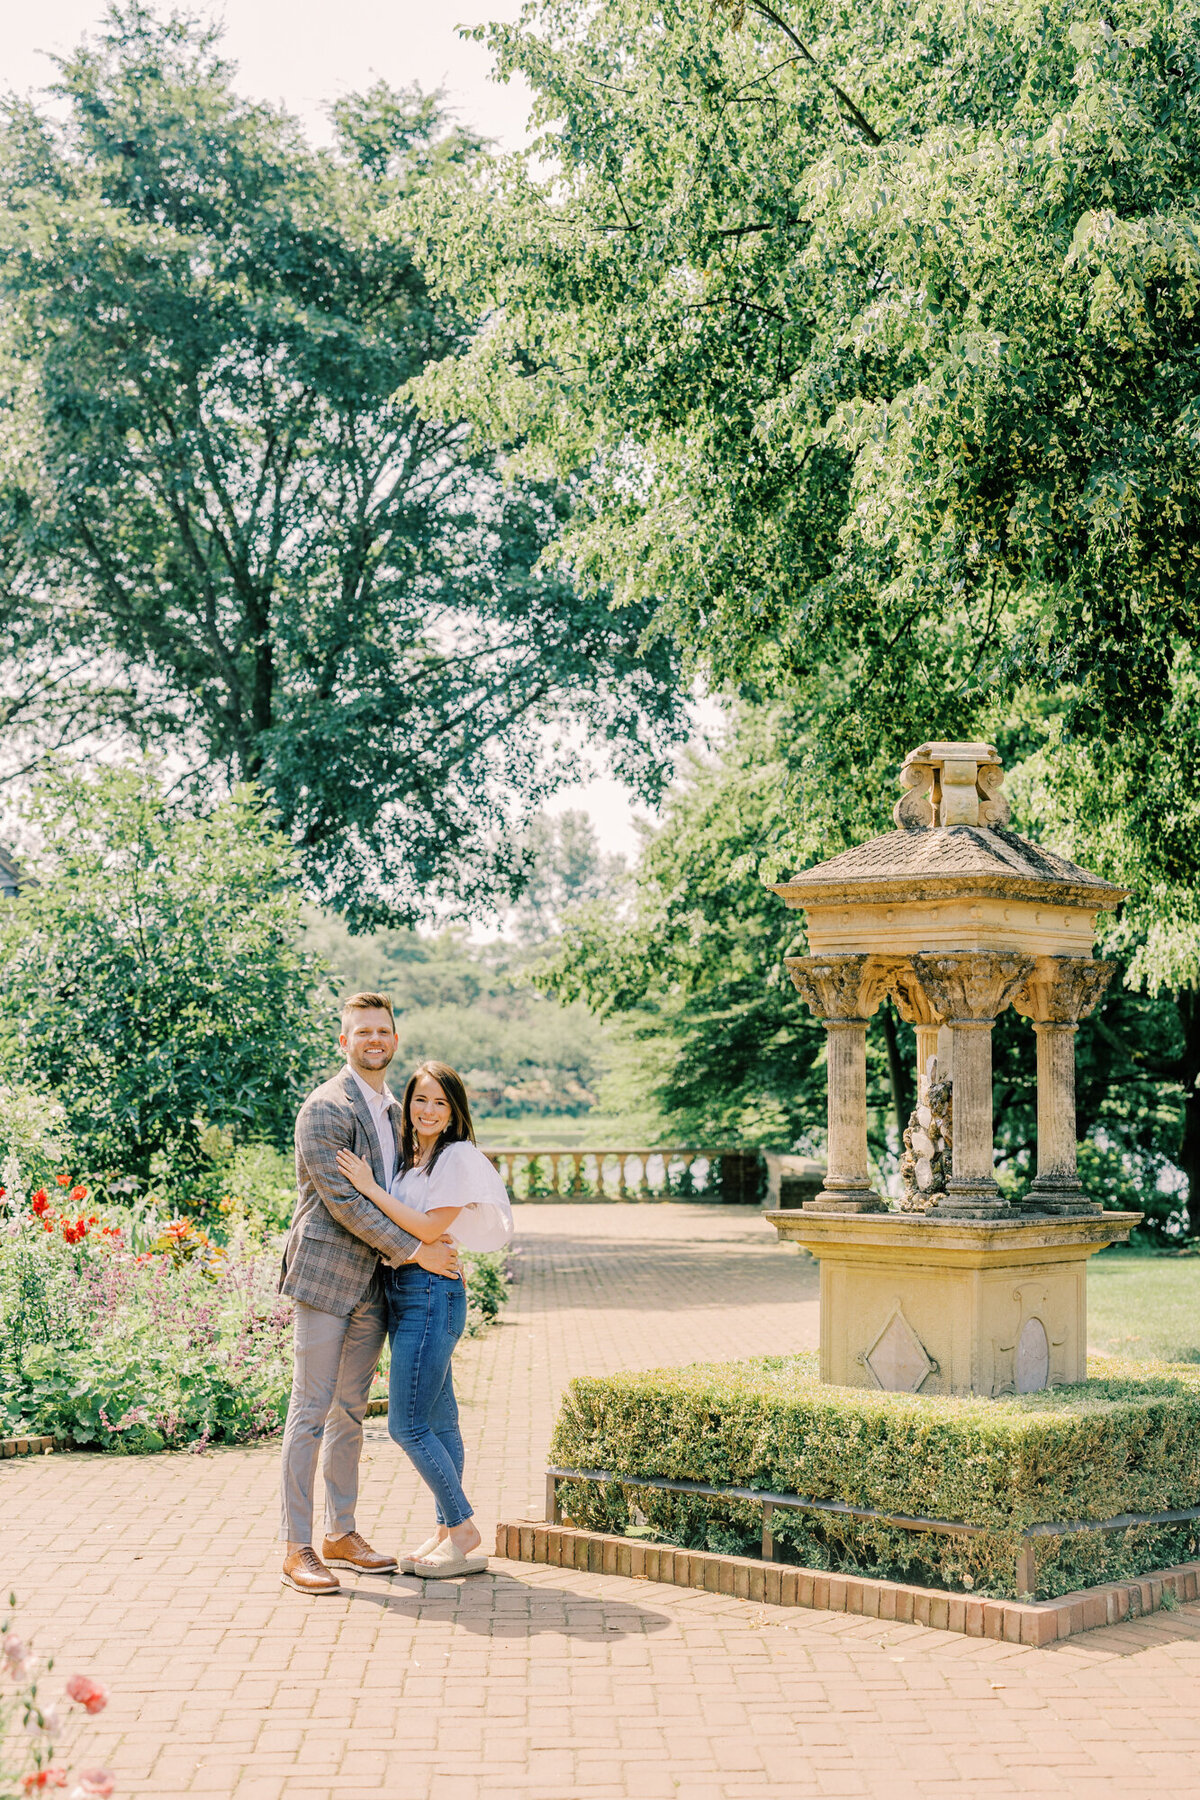 An engagement photo at the Chicago Botanic Garden